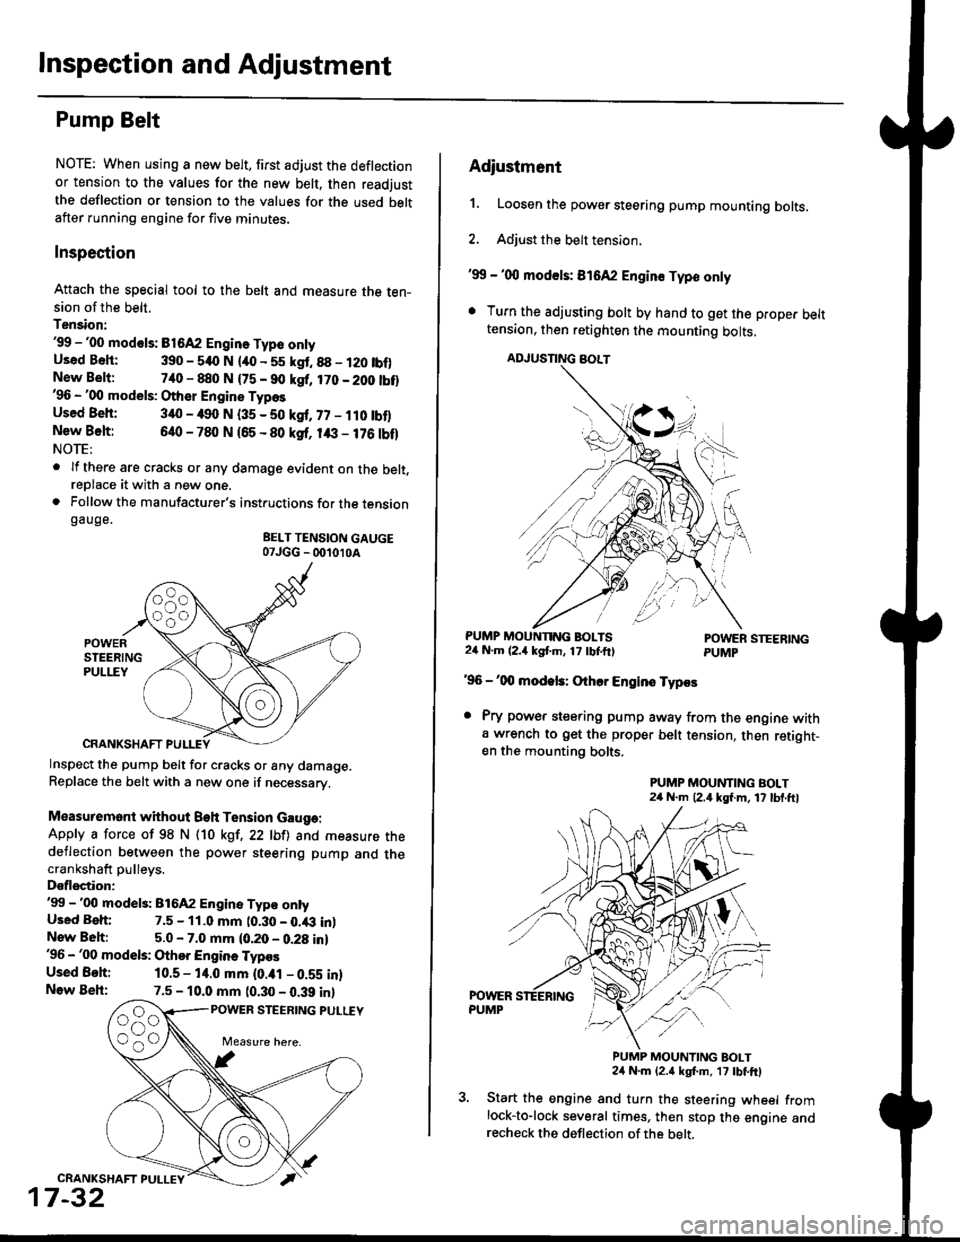 HONDA CIVIC 1999 6.G Manual Online Inspection and Adjustment
Pump Belt
NOTE: When using a new belt, first adjust the deflection
or tension to the values for the new belt, then readjust
the deflection or tension to the values for the us